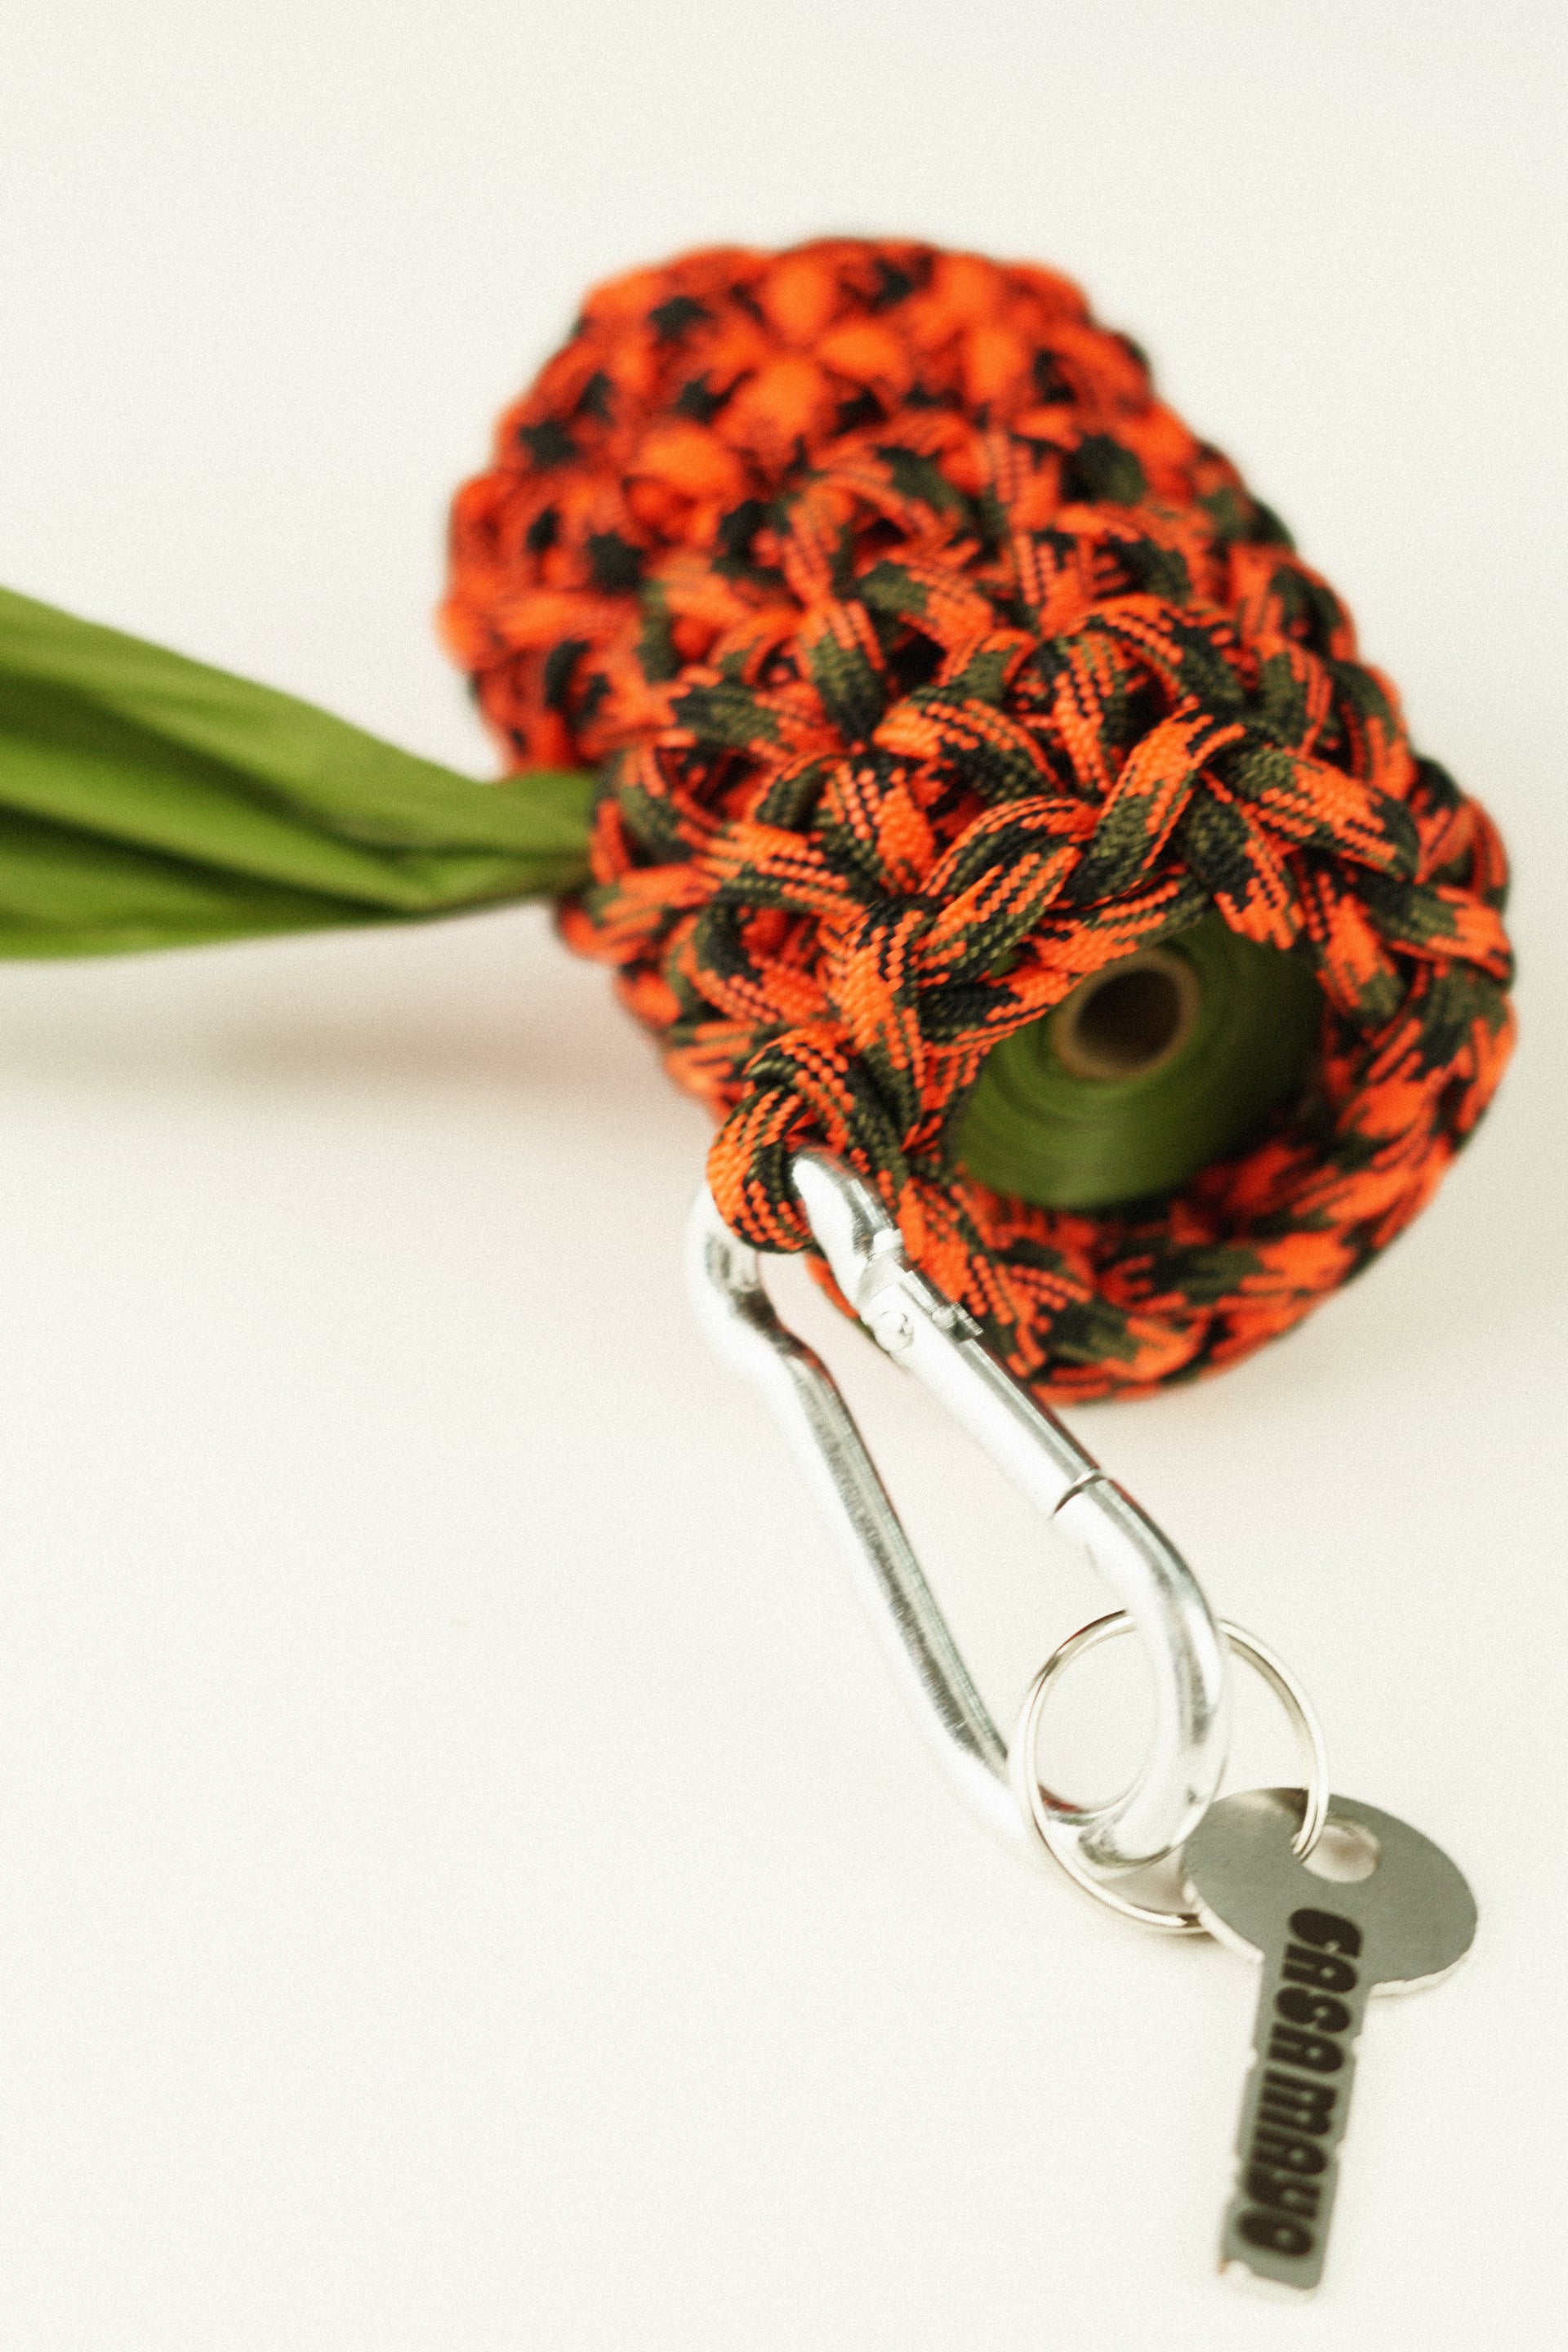 Orange and green pet bag holder made of paracord rope